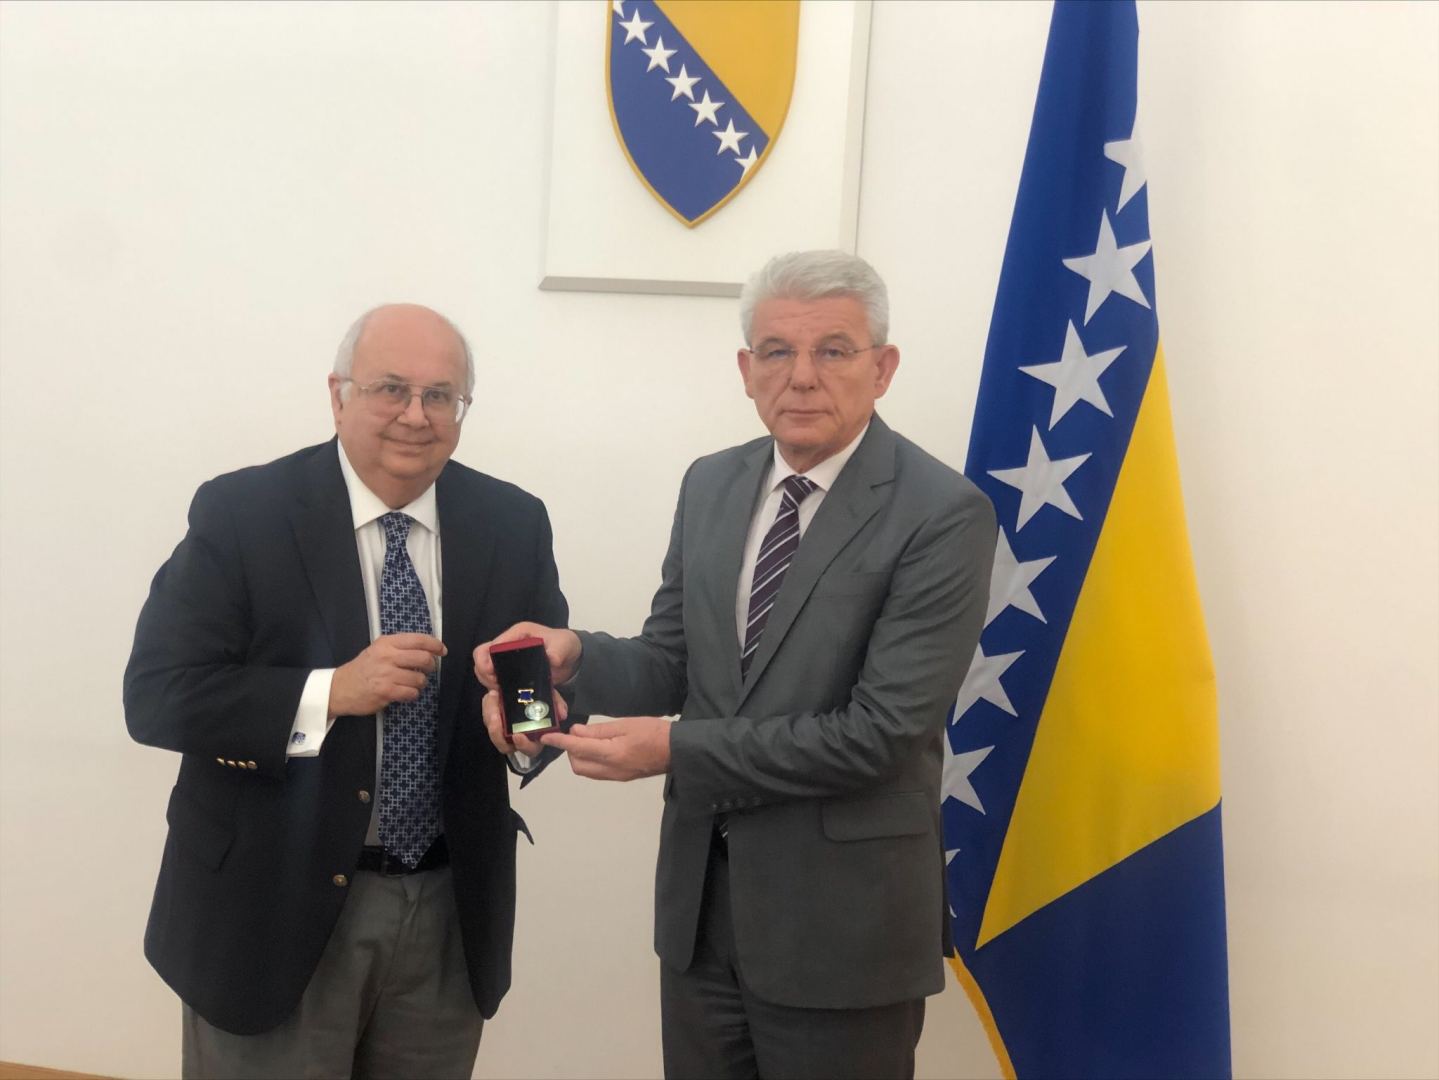 Co-chair of Nizami Ganjavi Int'l Center meets with Chairman of Presidency of Bosnia and Herzegovina (PHOTO)